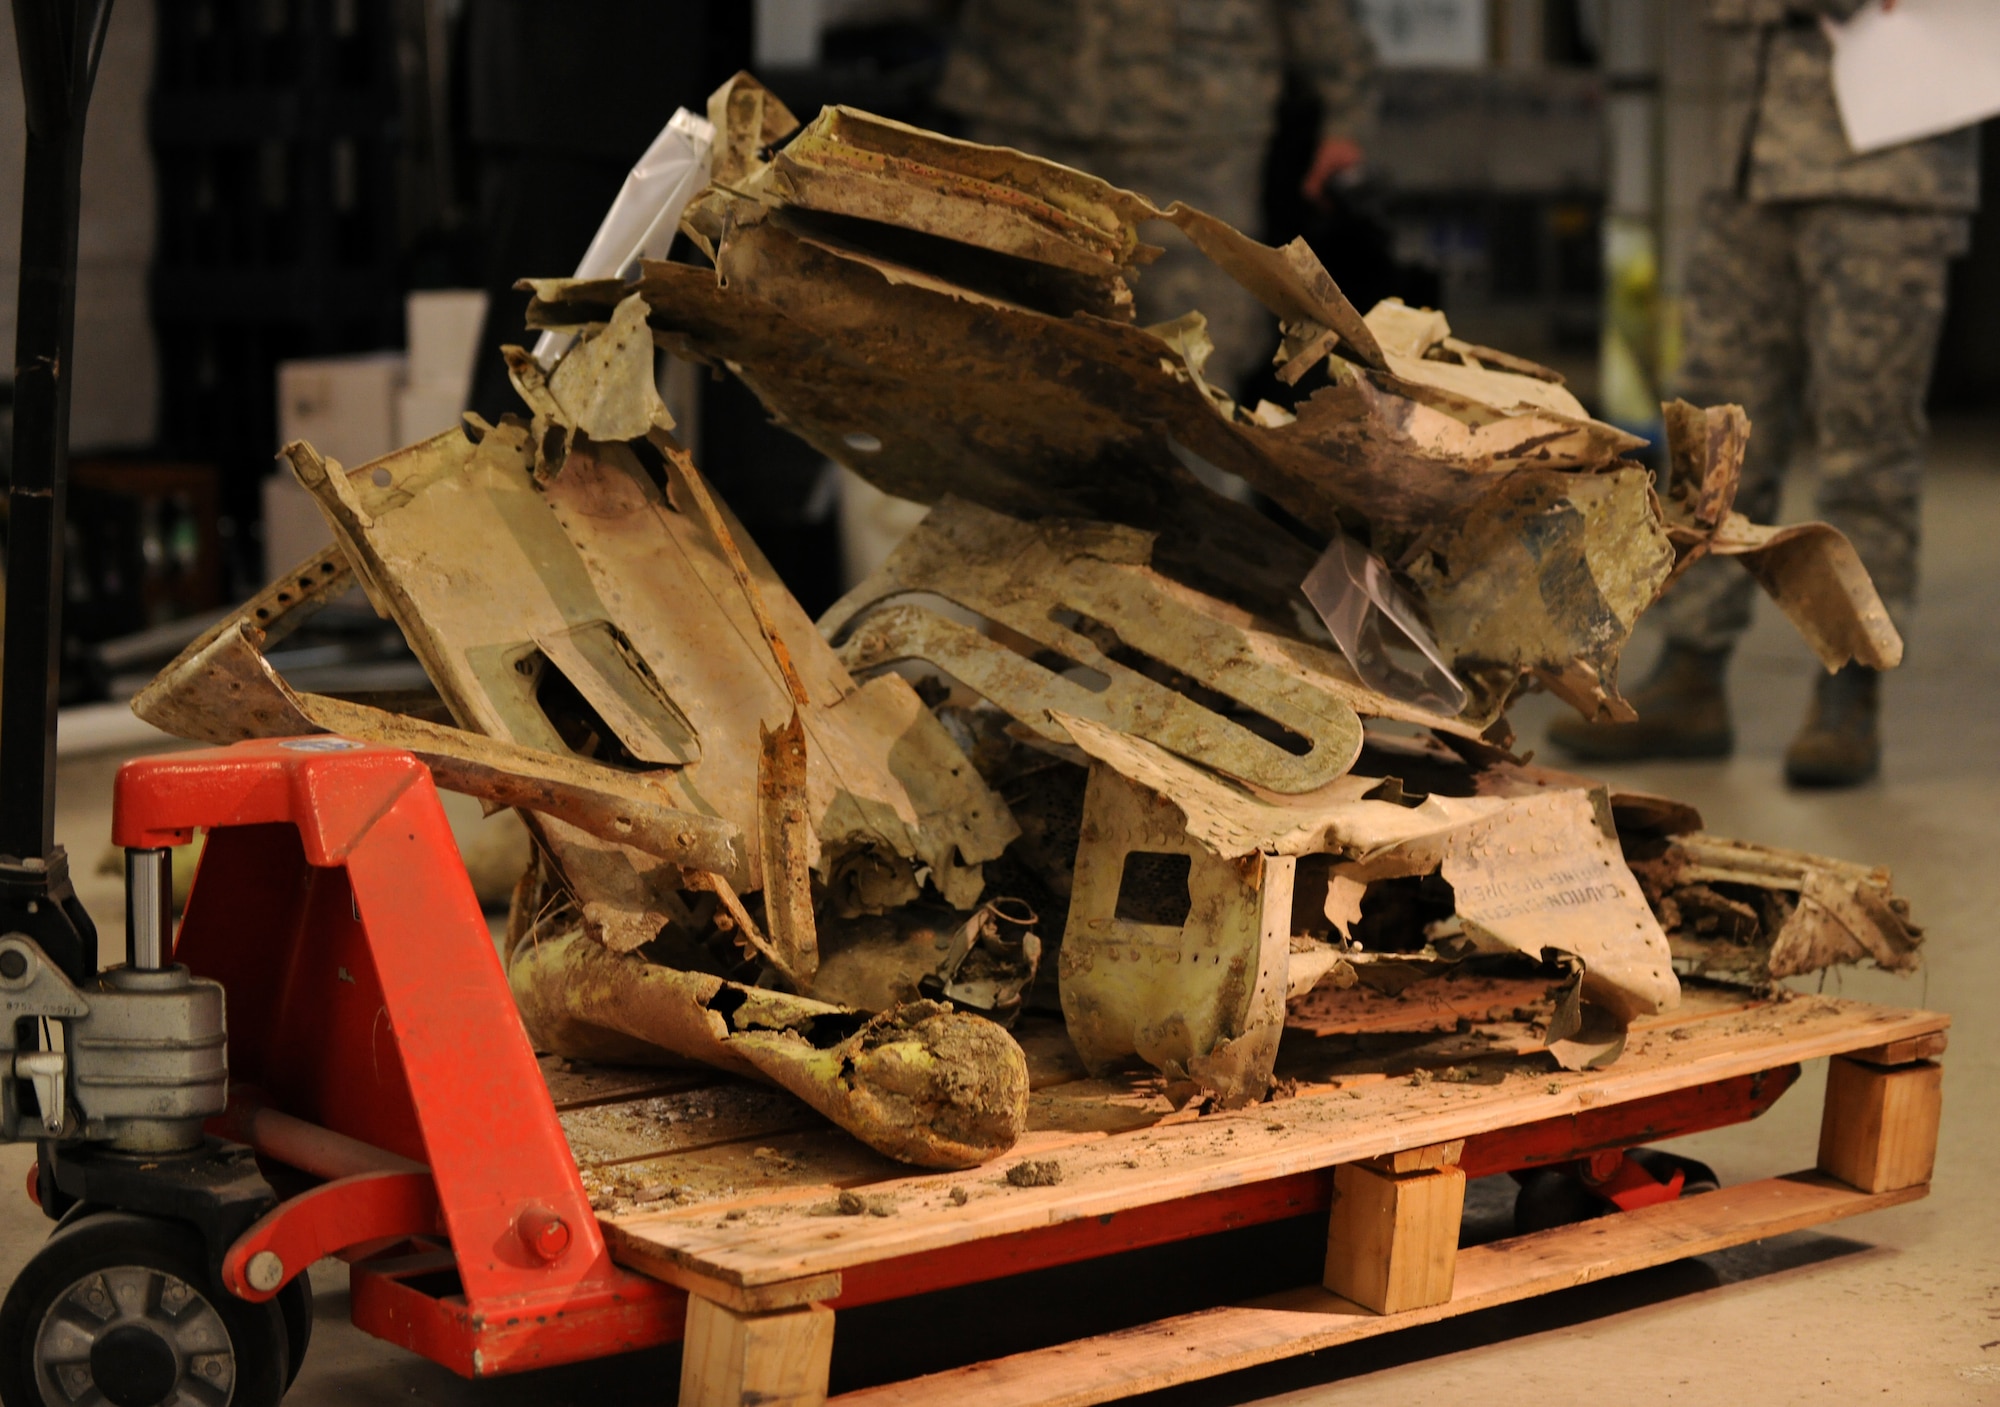 BITBURG, Germany – Wreckage of a P-47D Thunderbolt sits on a pallet during a press event at Volksbank Bitburg March 24. The plane was discovered on Feb. 24 in Bitburg, 65 years after it crashed in the area. (U.S. Air Force photo/Senior Airman Nathanael Callon)